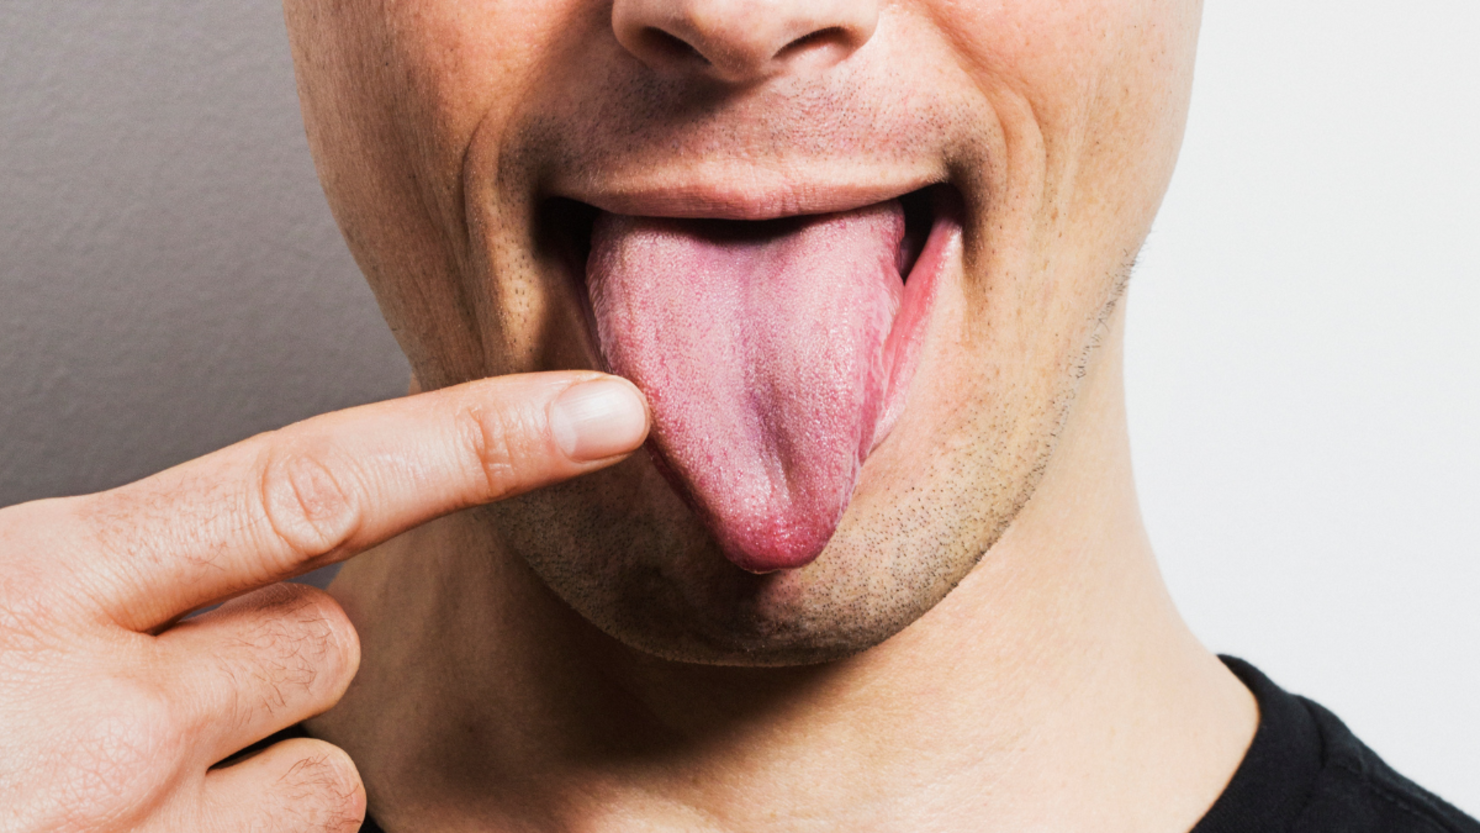 WATCH: California Man With World's Longest Tongue Breaks Another Record ...